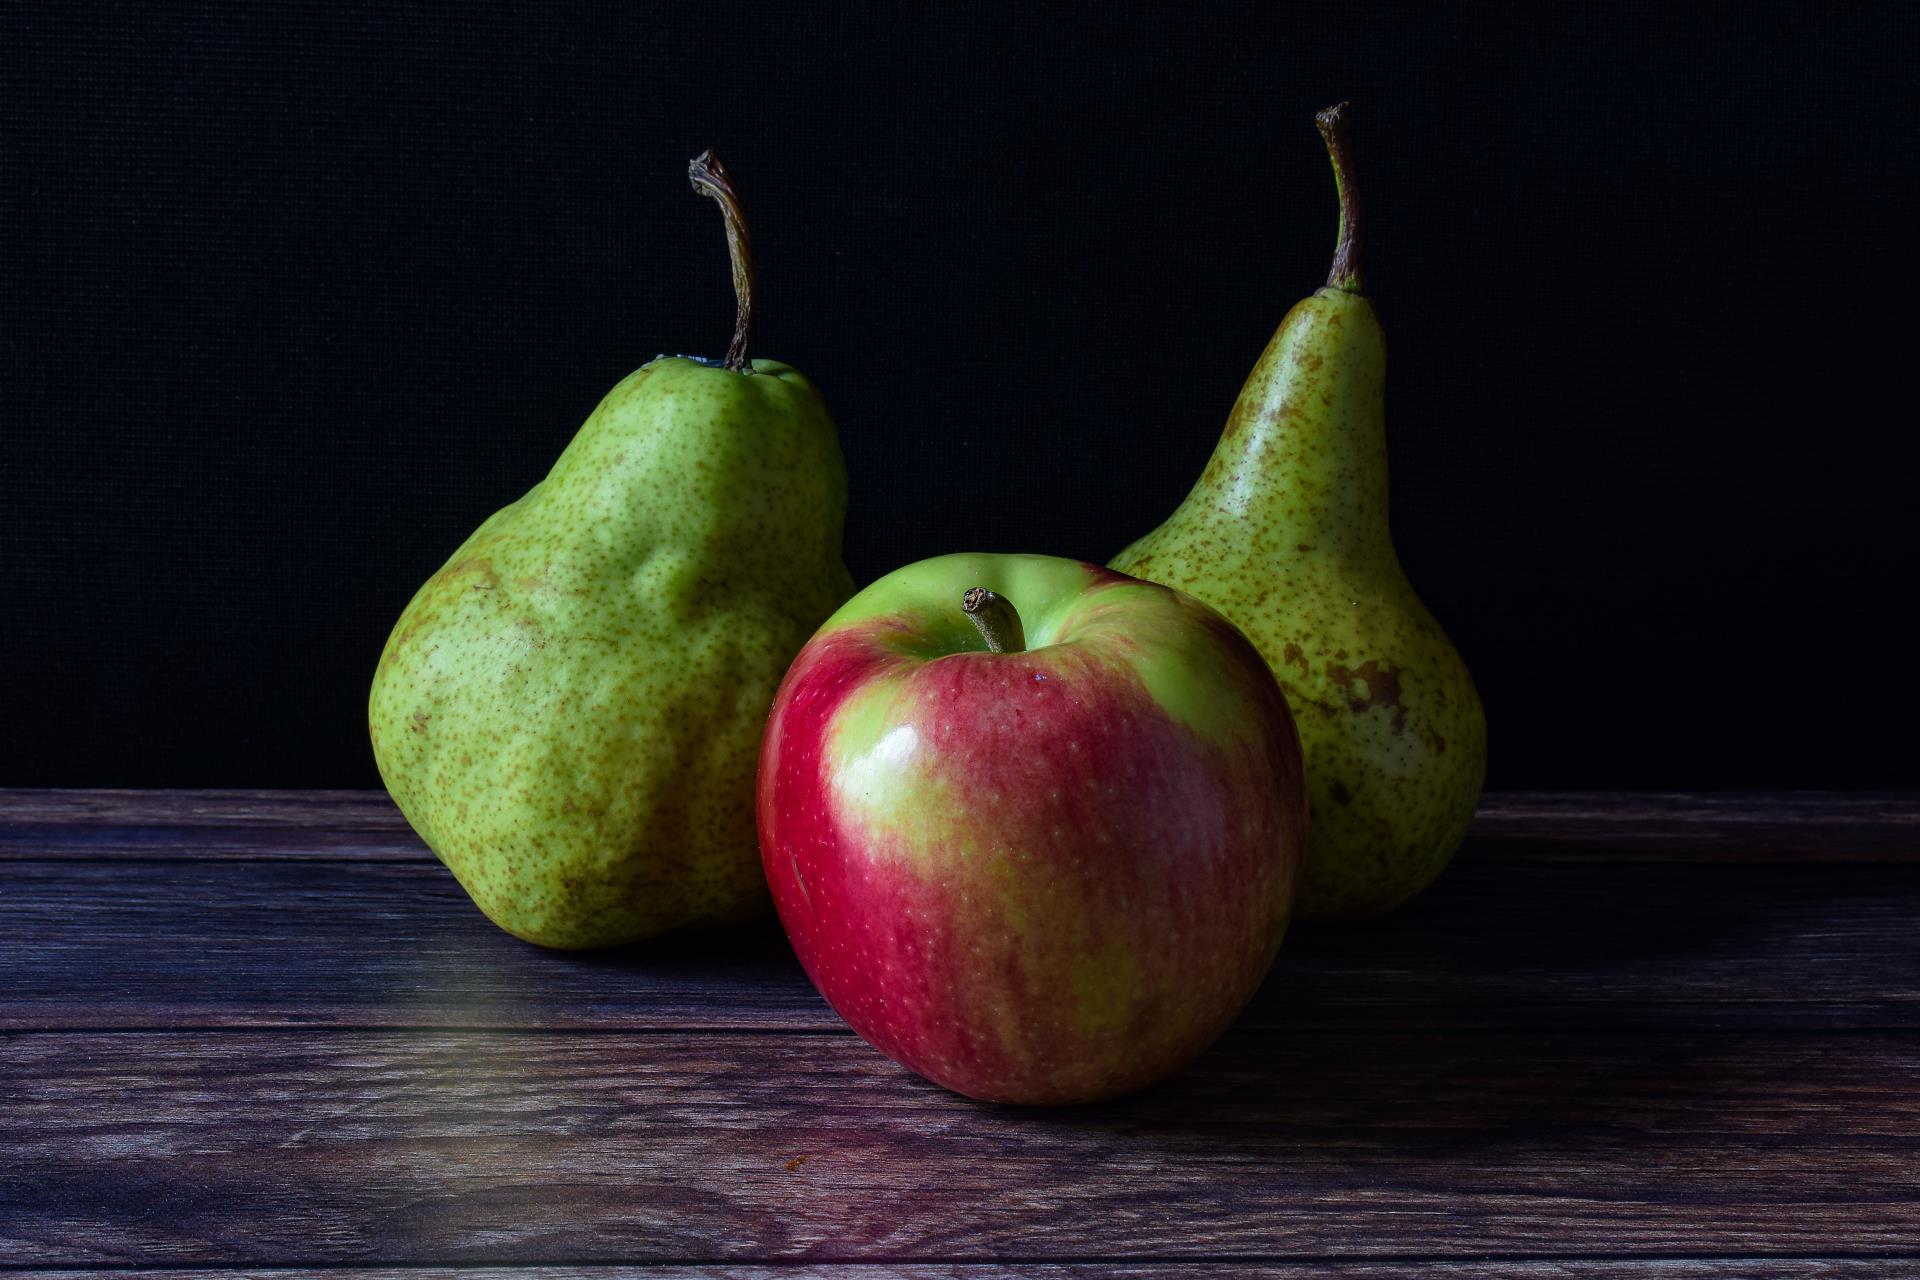 Everything Apples and Pears - A Zero Waste Workshop with Araluen Hagan